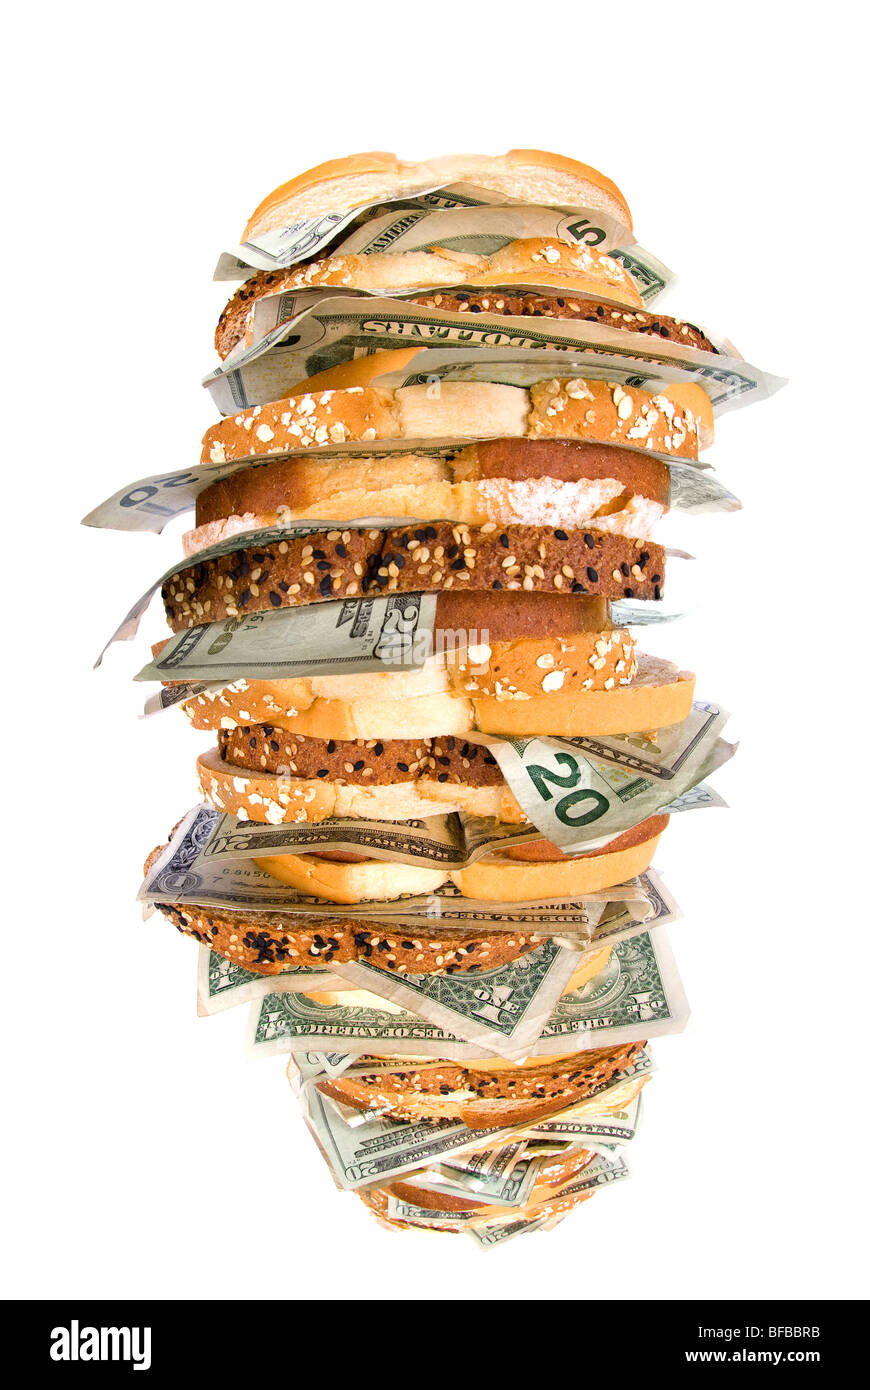 A giant, fresh money sandwich with multiple types of bread and cash denominations Stock Photo